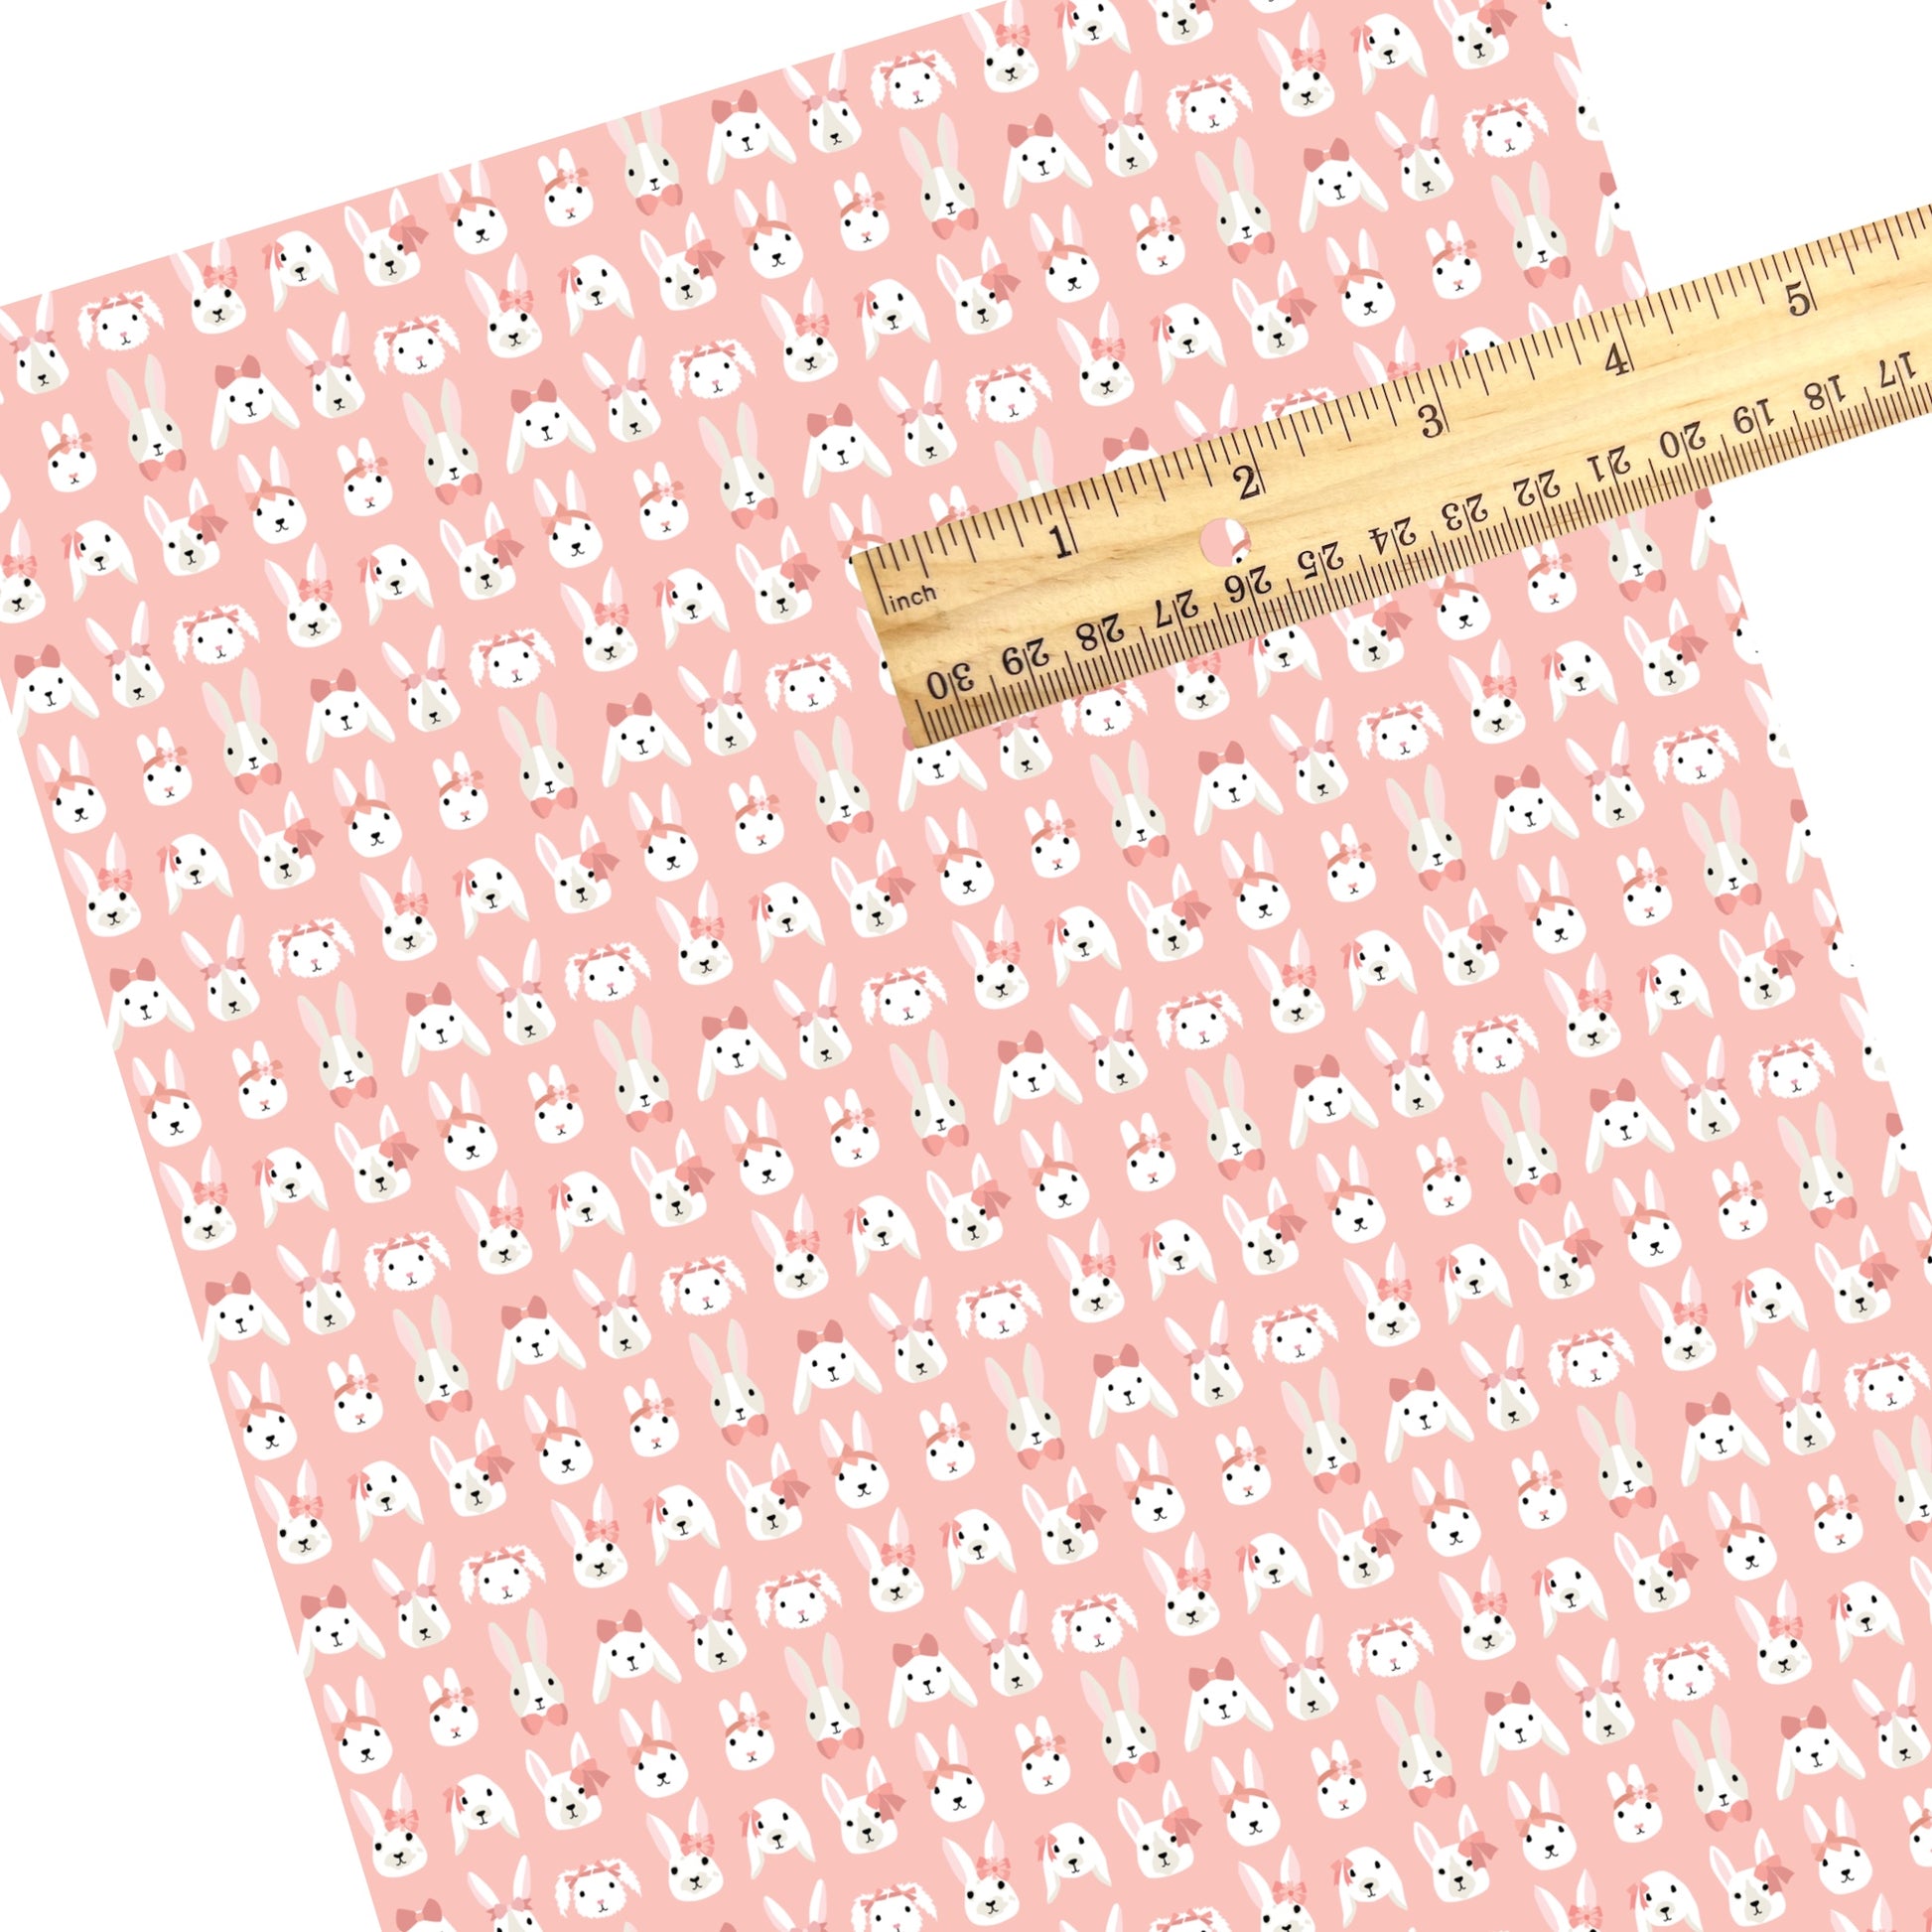 These summer faux leather sheets contain the following design elements: bunnies with bows on pink. Our CPSIA compliant faux leather sheets or rolls can be used for all types of crafting projects.